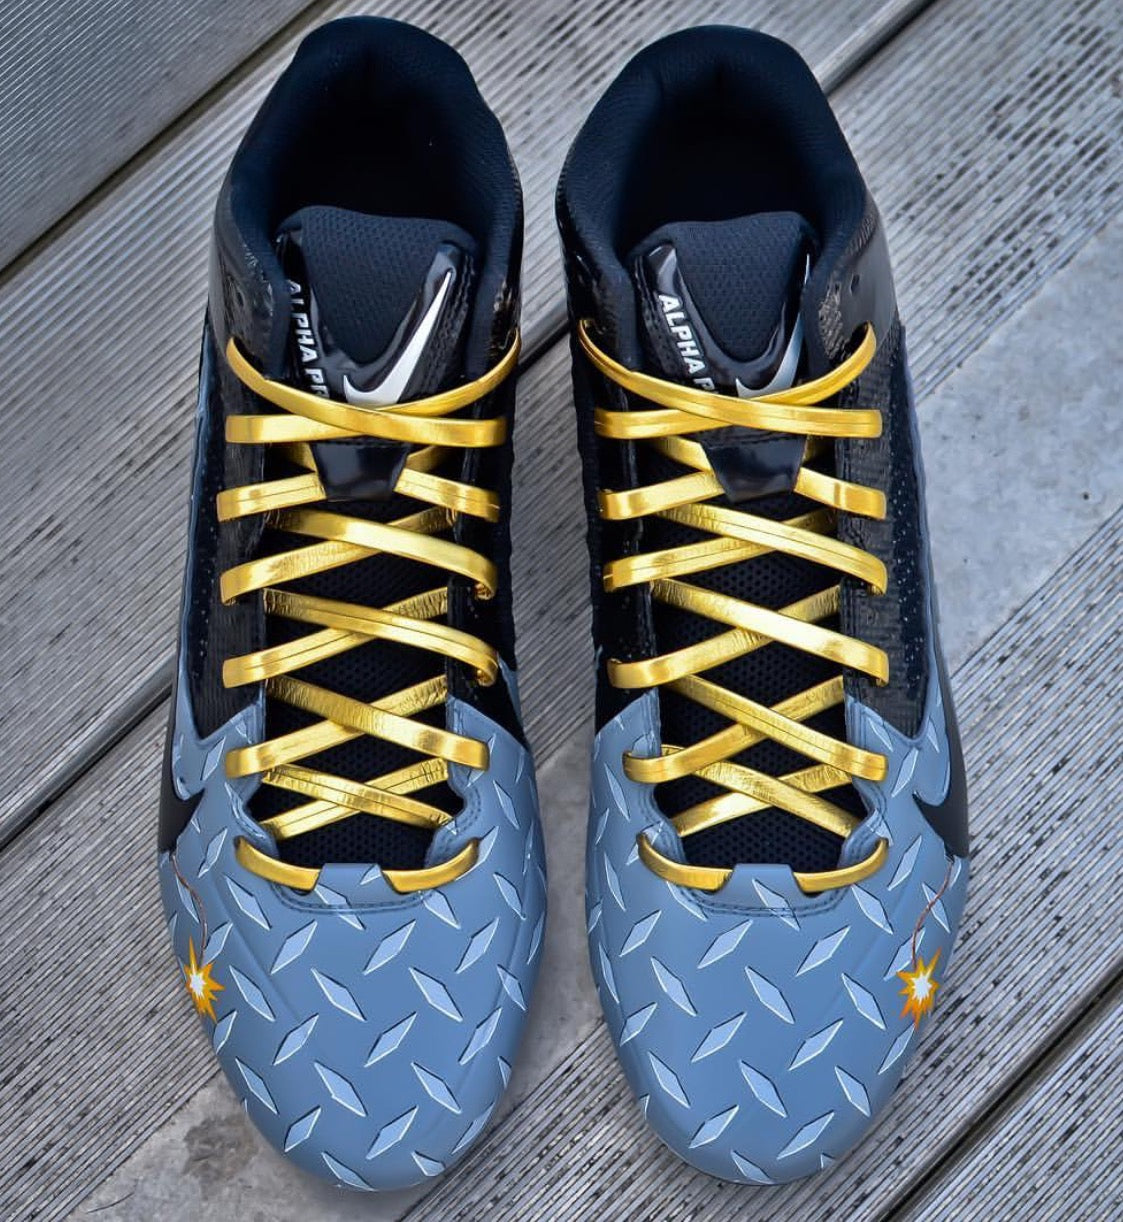 black and gold shoelaces